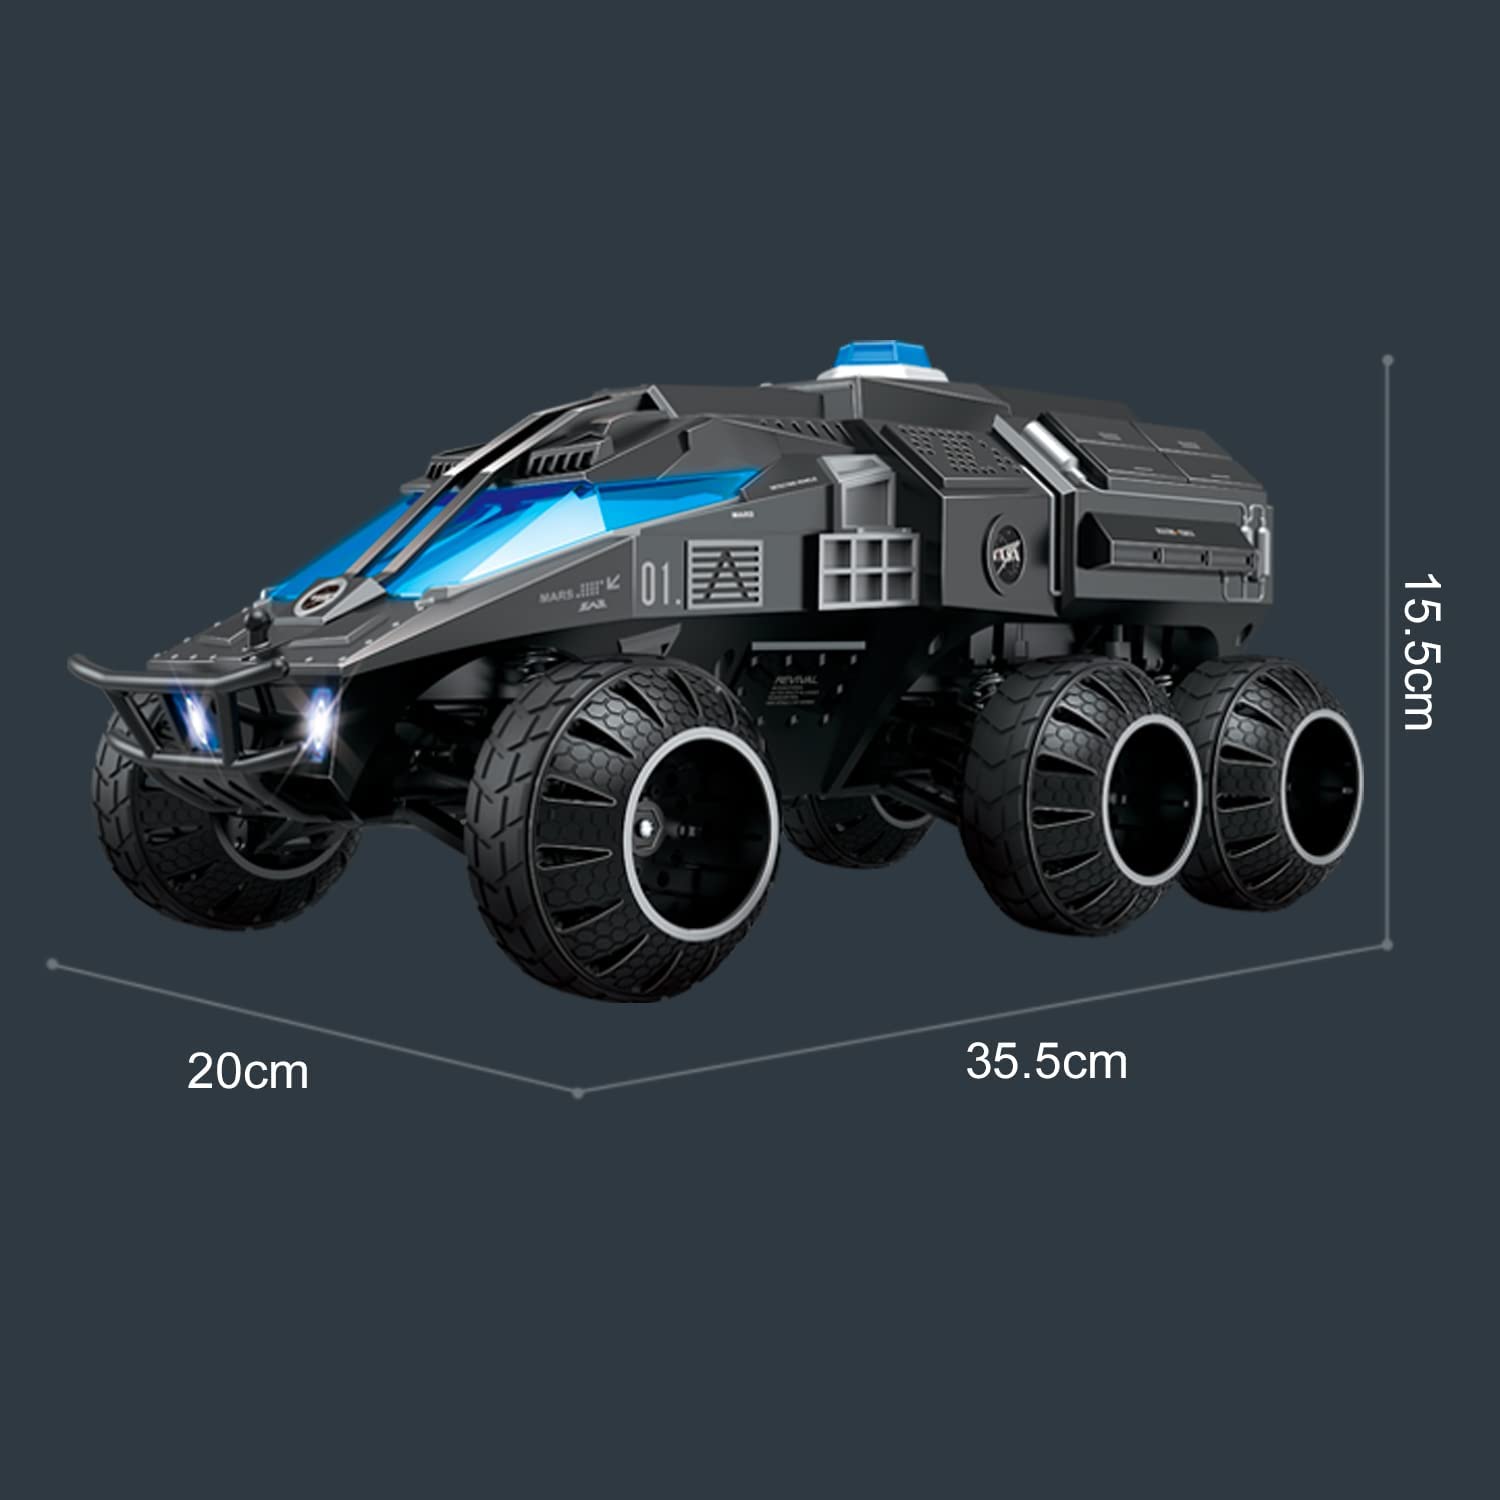 RACENT RC Crawler 1:12 Sale 6X6 2.4GHZ 15kmh Off Road All Terrain Monster Trucks with Colorful Led Lights (Grey)